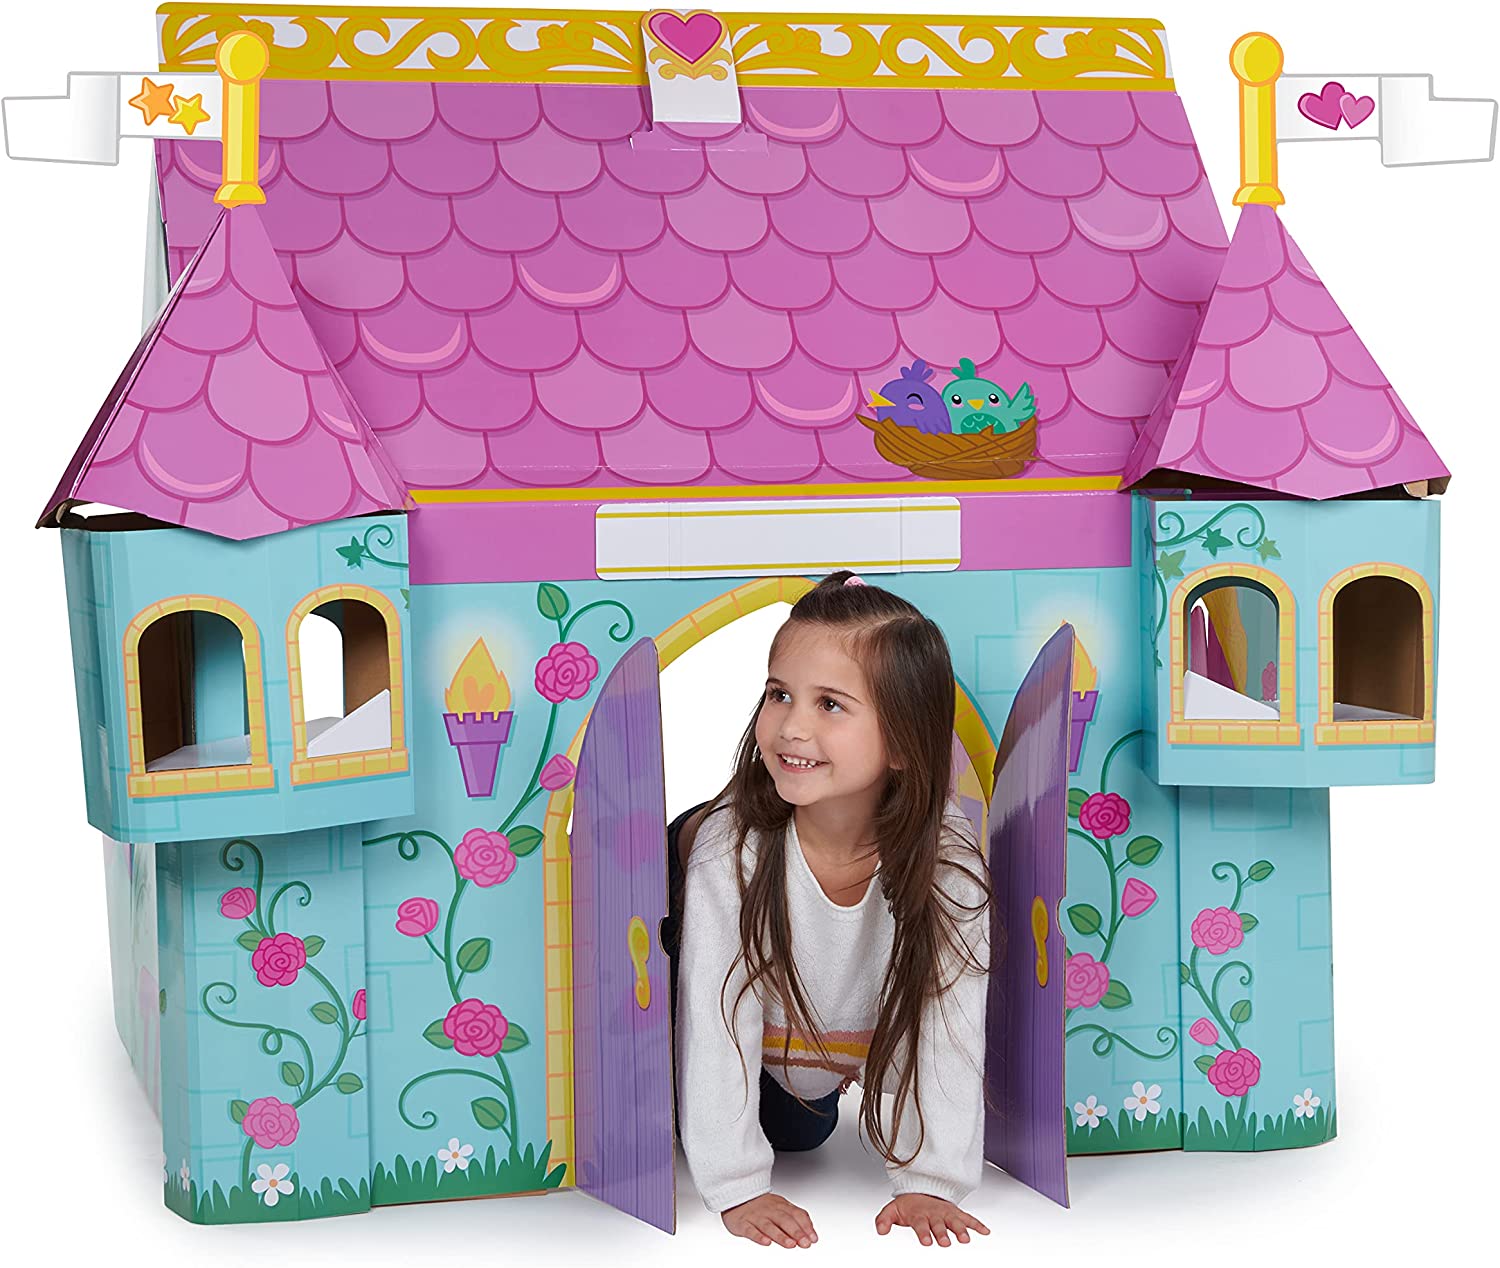 Pop2Play Fold & Store Fairytale Castle Playhouse $14.20 & More + FS w/ Amazon Prime or FS on $25+